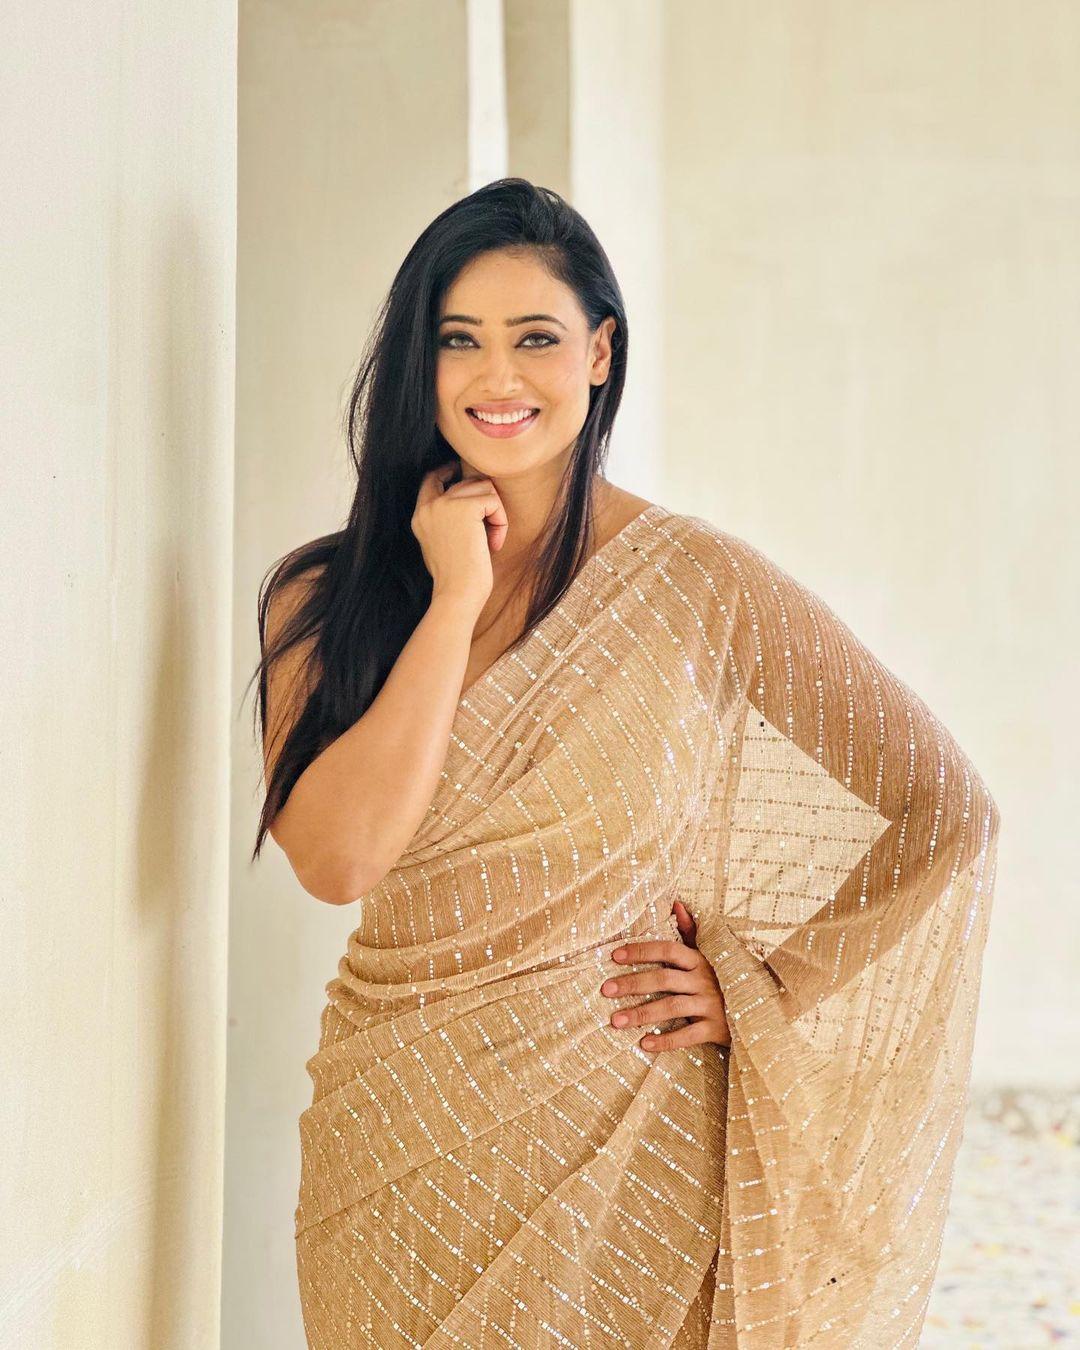  Shweta Tiwari is a veteran television actress who rose to fame with her role as Prerna Sharma in the iconic soap opera 'Kasautii Zindagii Kay'